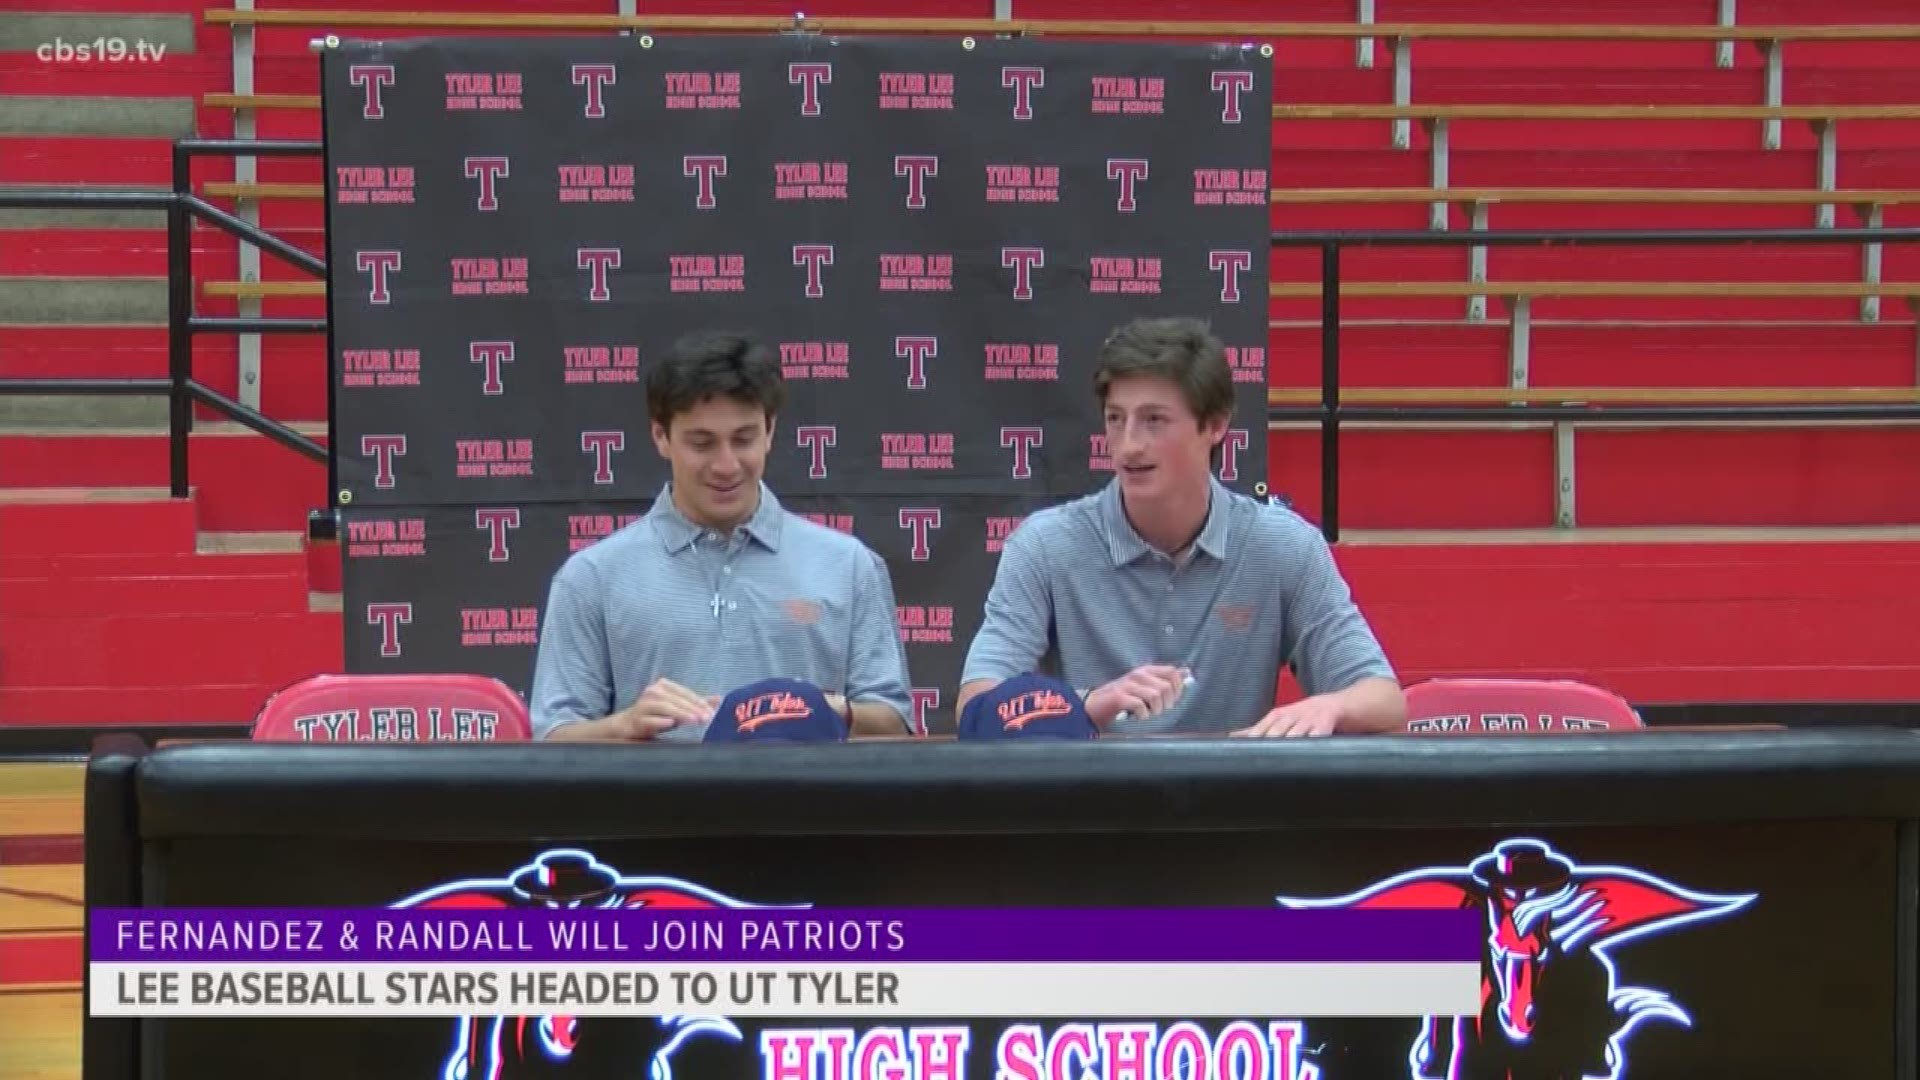 Lee baseball players sign with UT Tyler